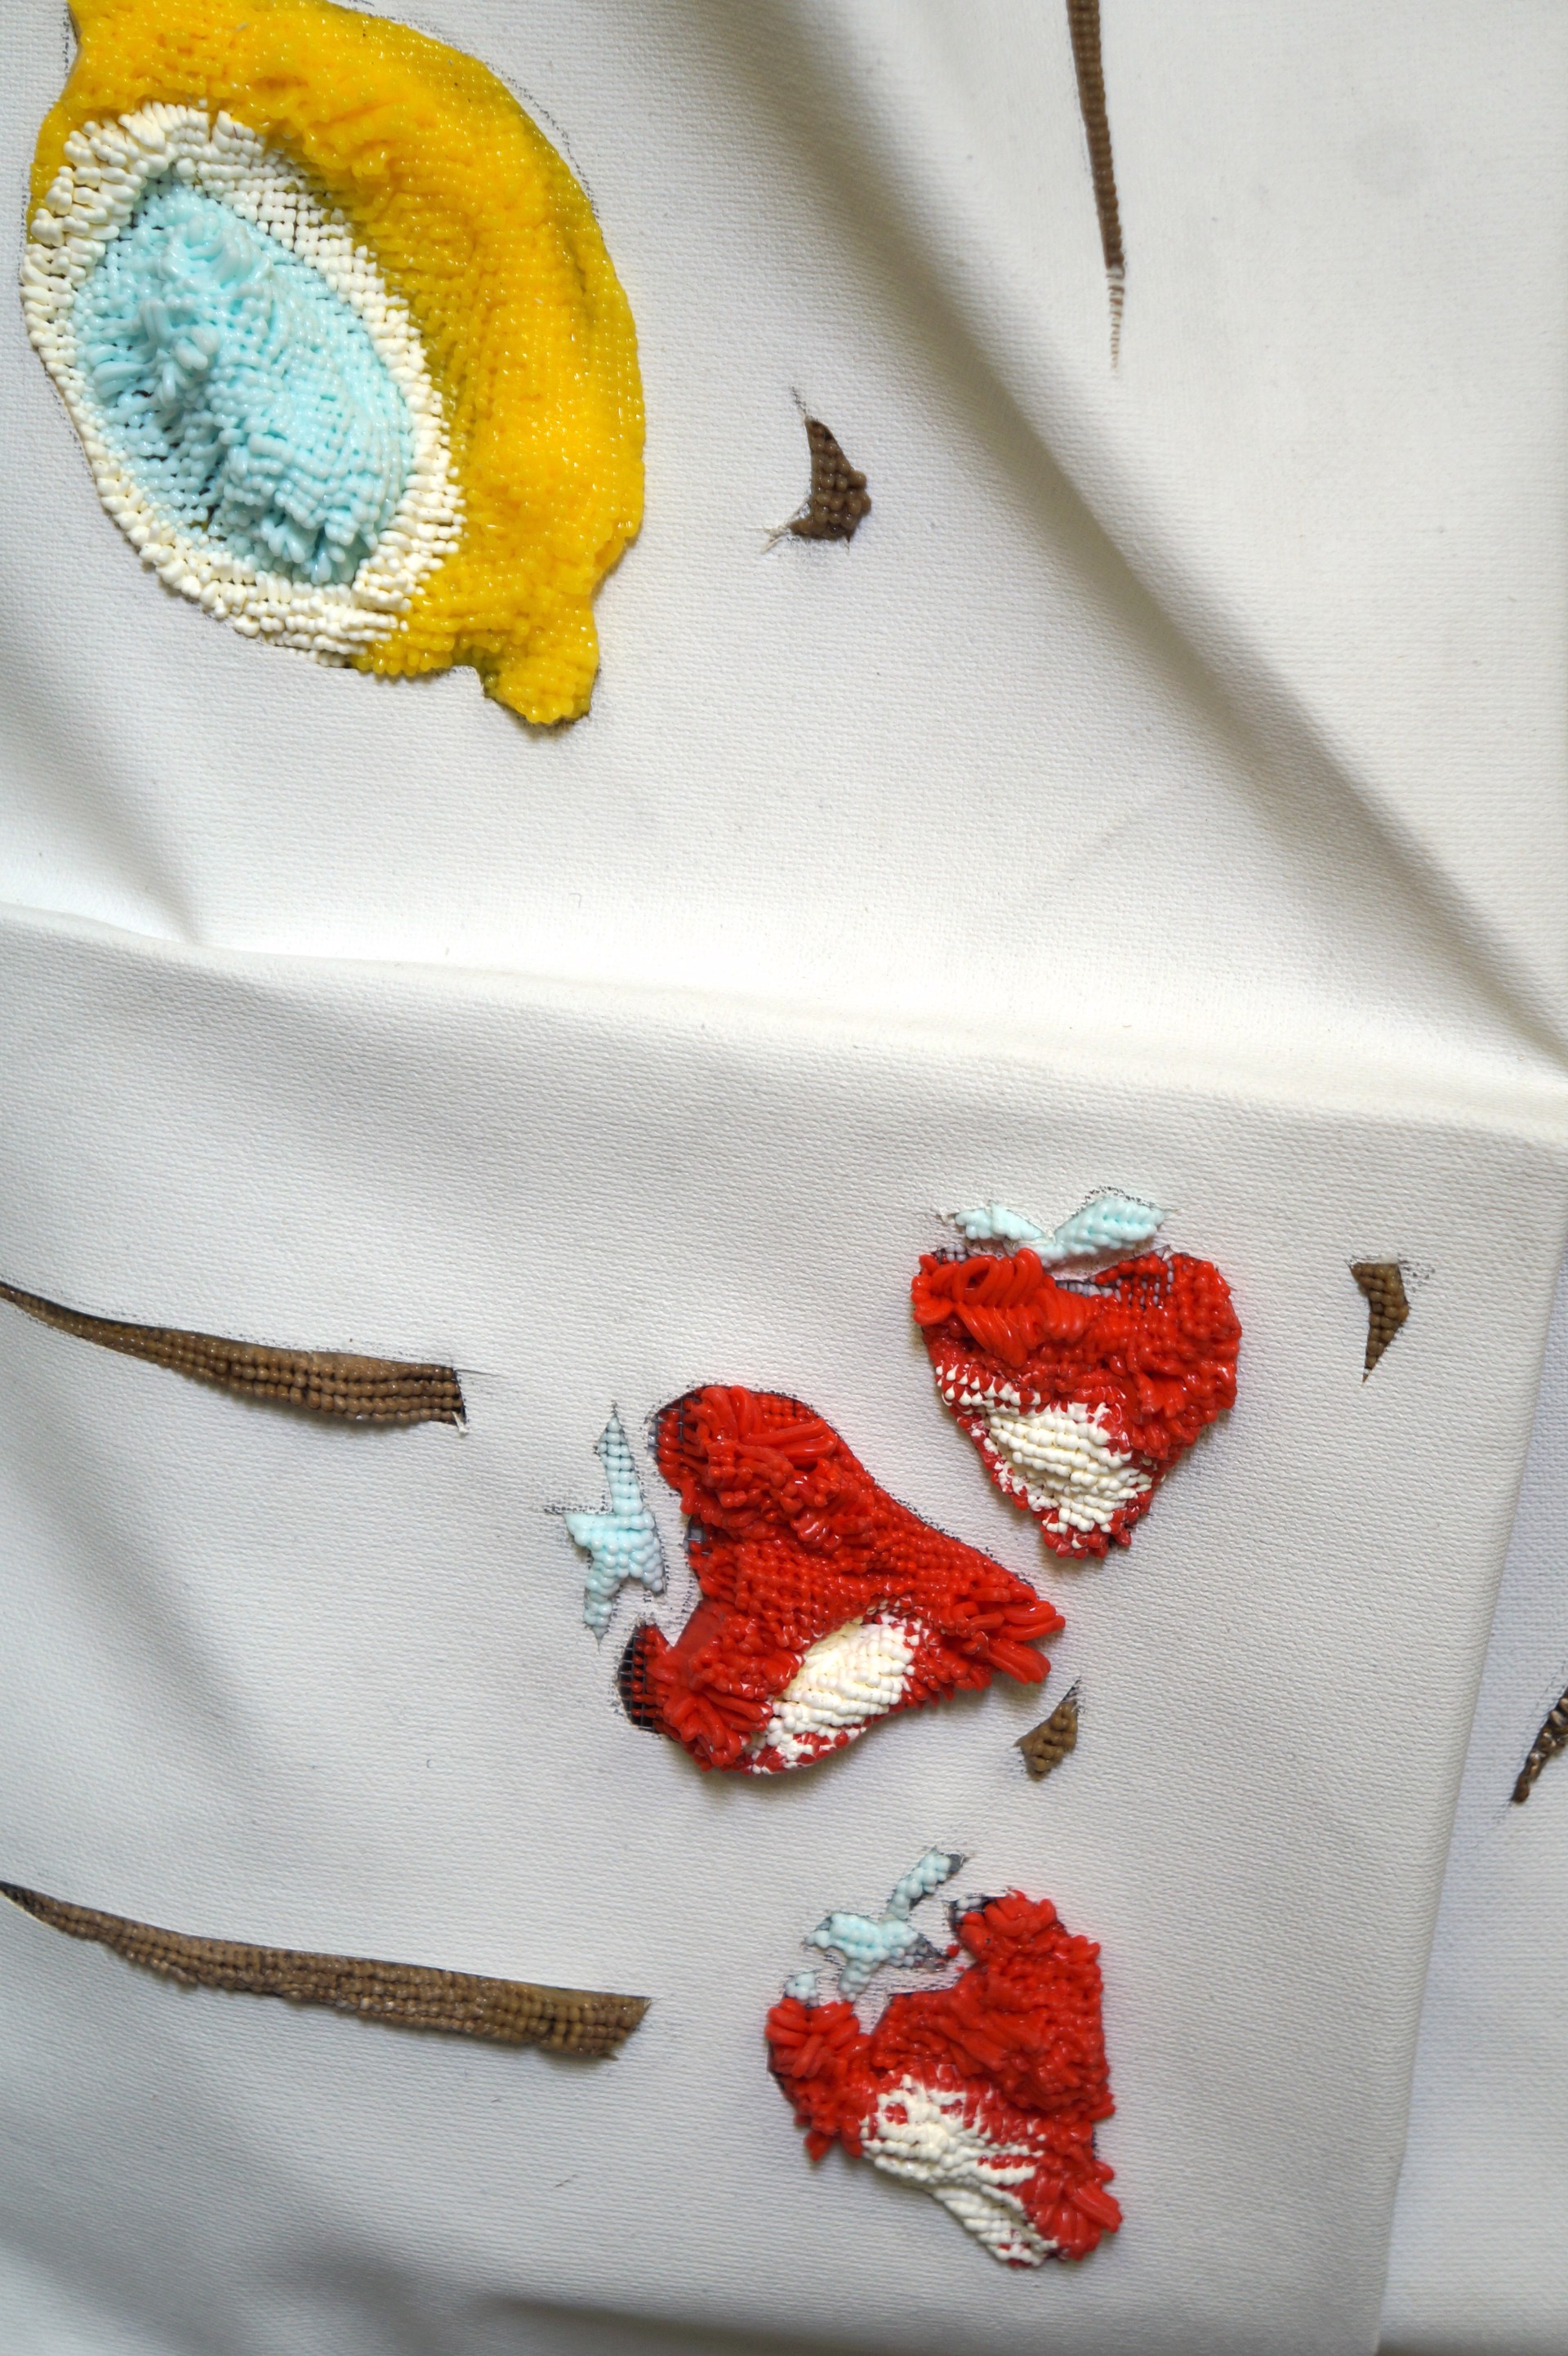 Quadrant Backpack with Rotting Strawberries by Eleanor Aldrich